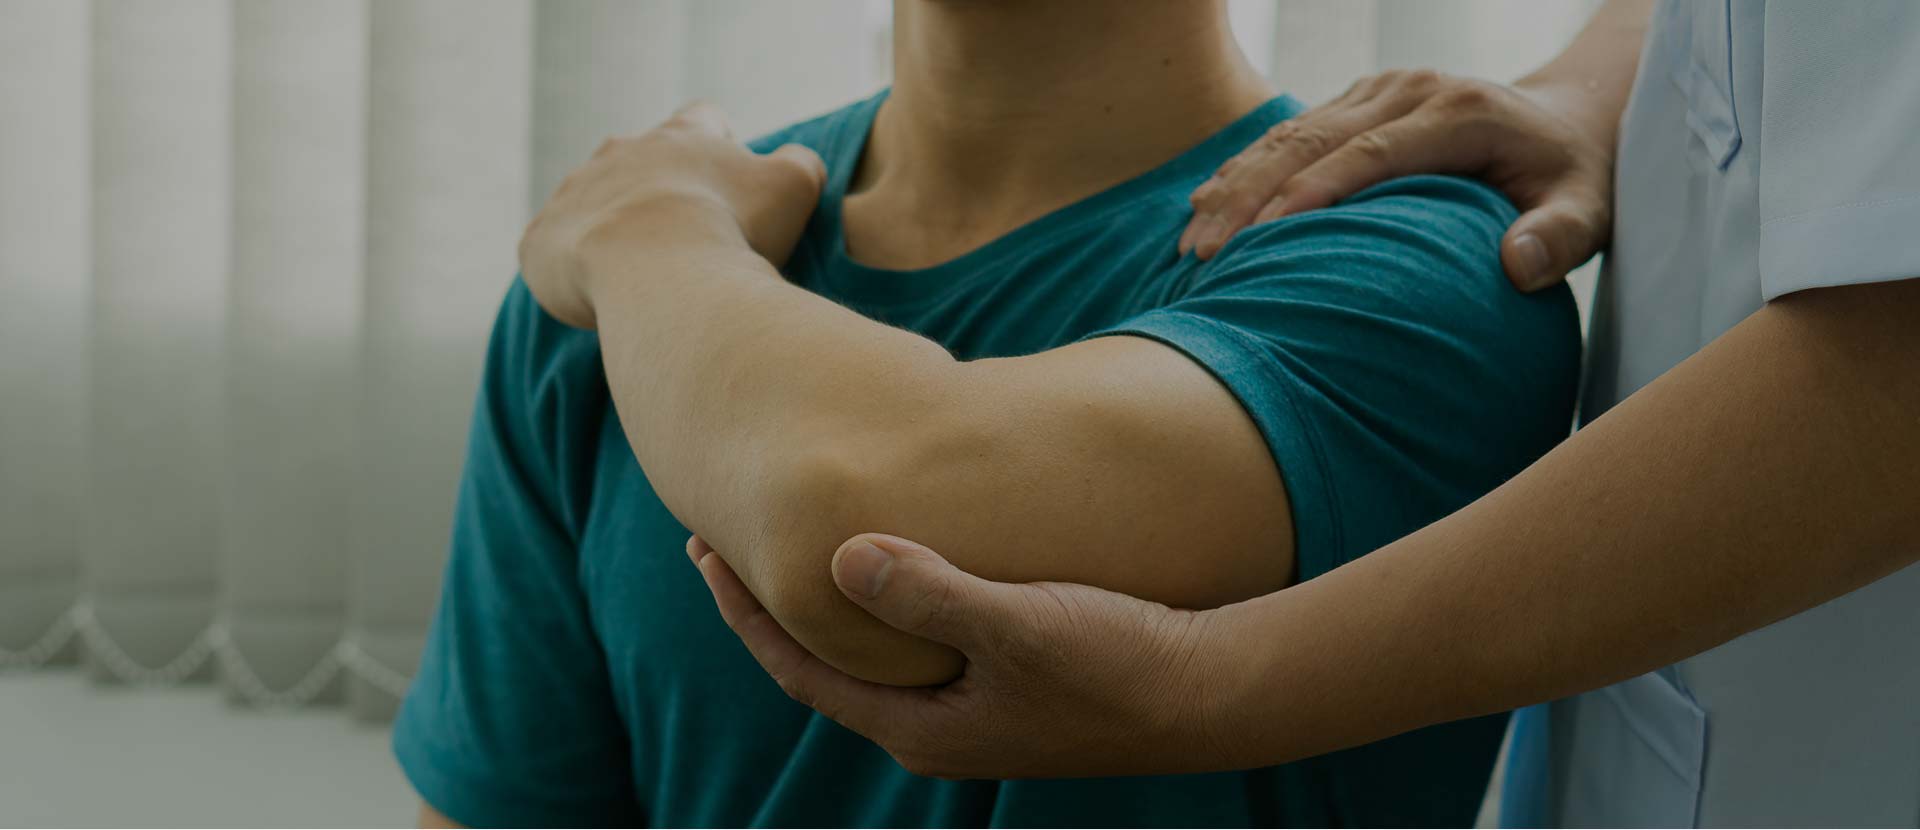 Physical therapy for arm and elbow in the Indianapolis area from Milestone Physical Therapy & Training | Indianapolis Physical Therapists